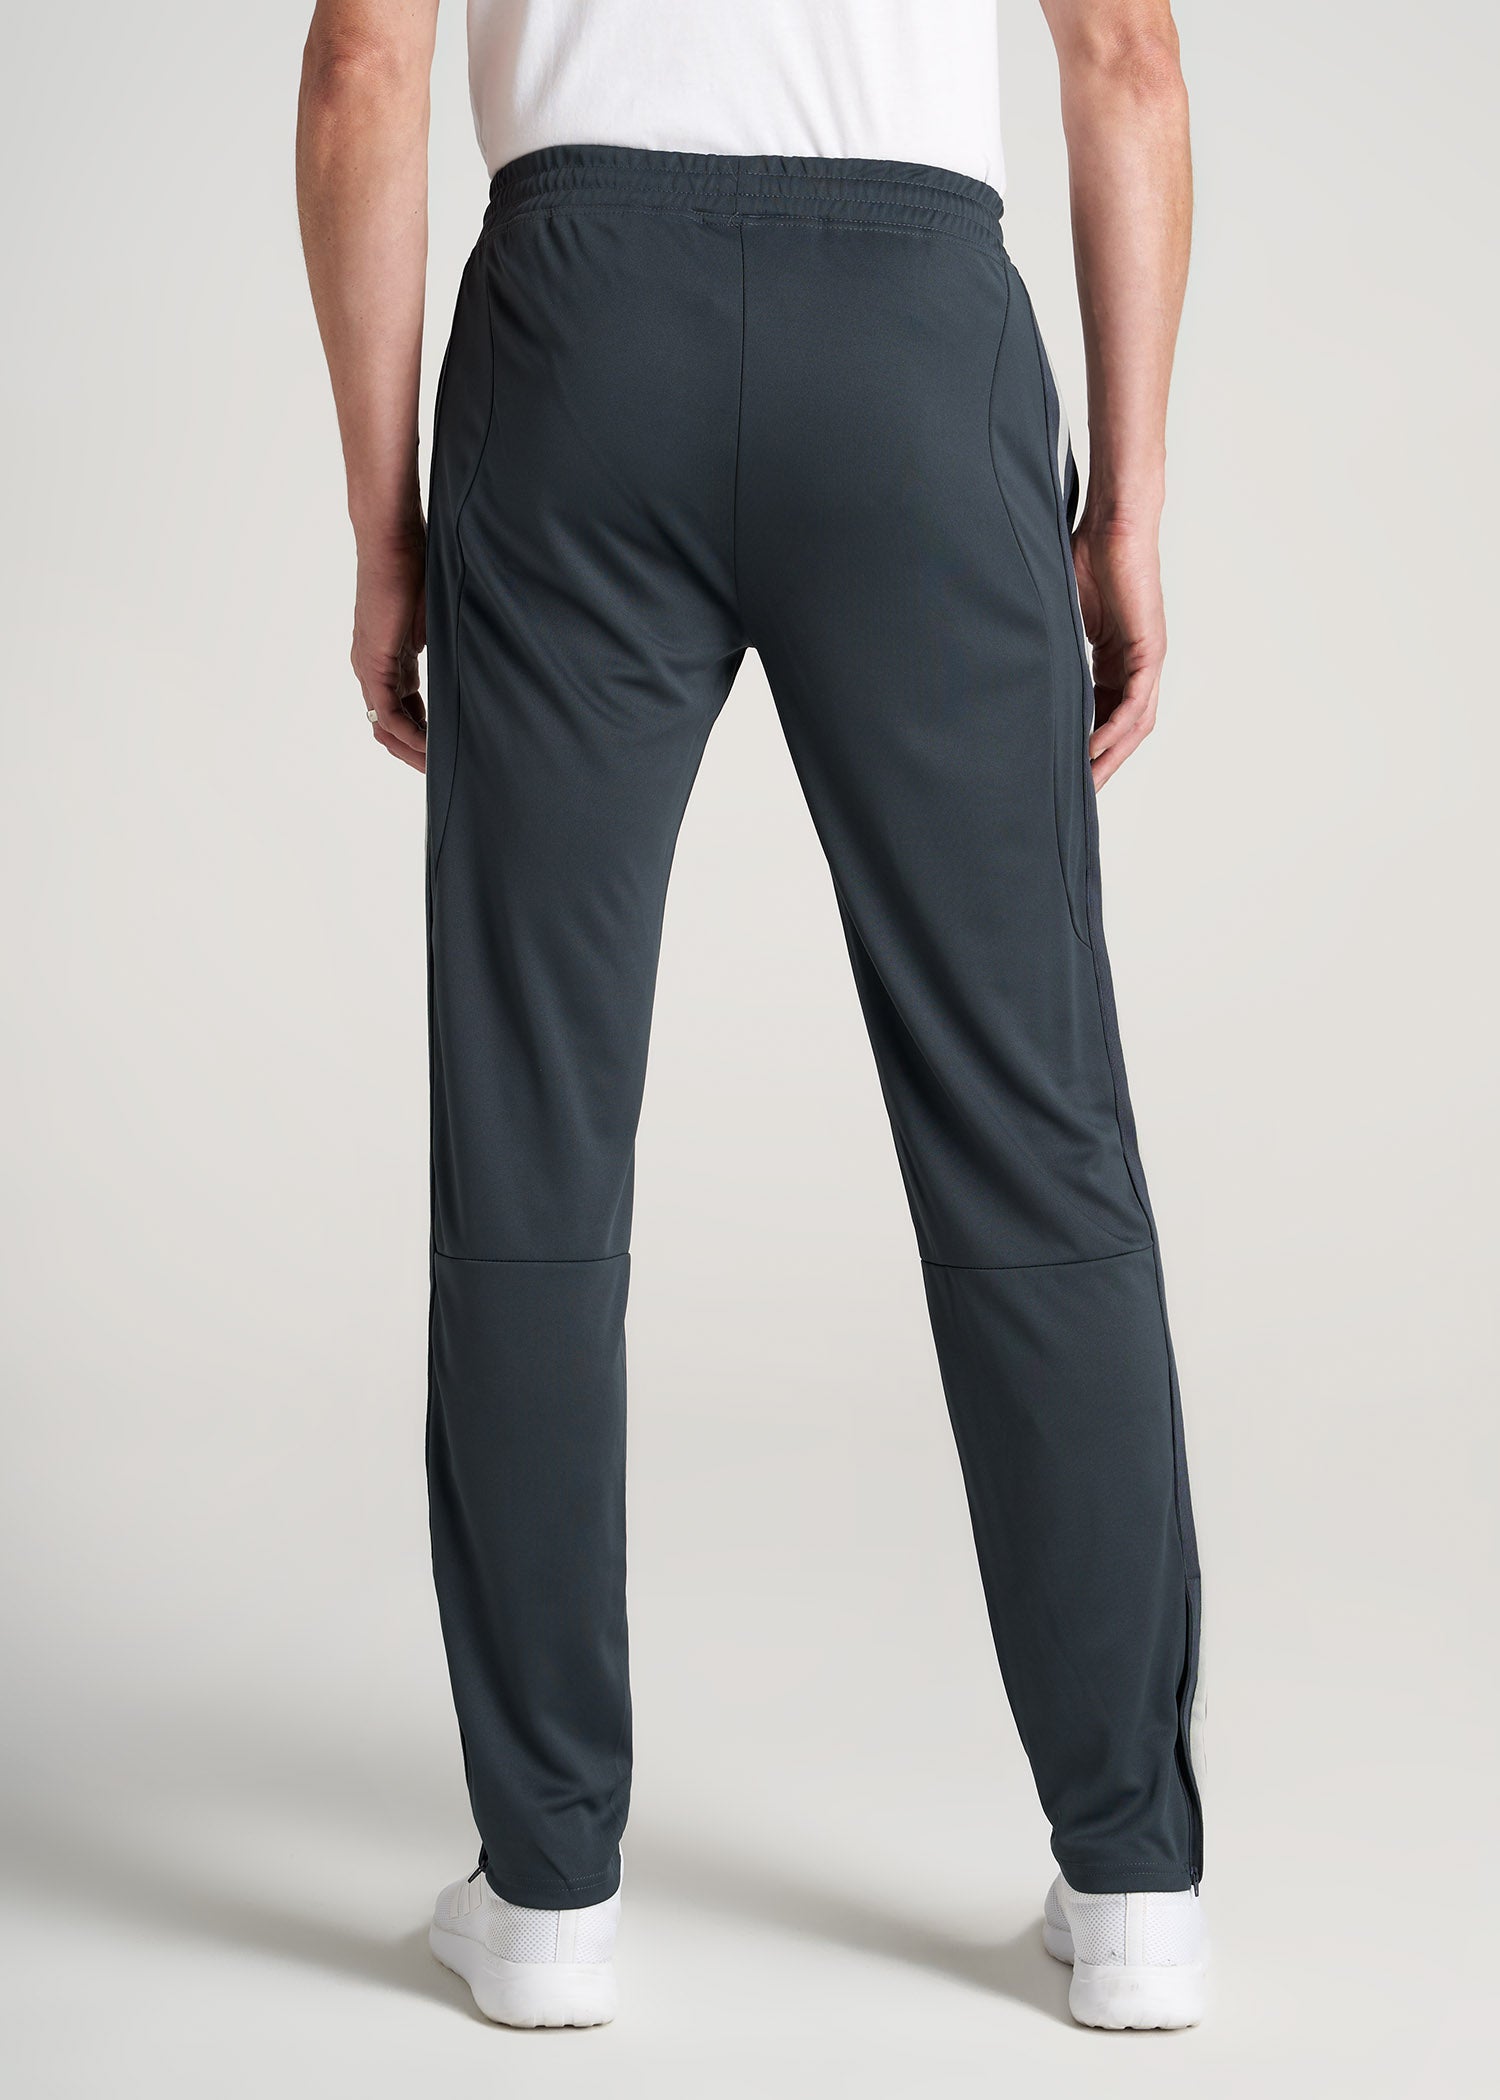 Athletic Stripe Pants for Tall Men | American Tall